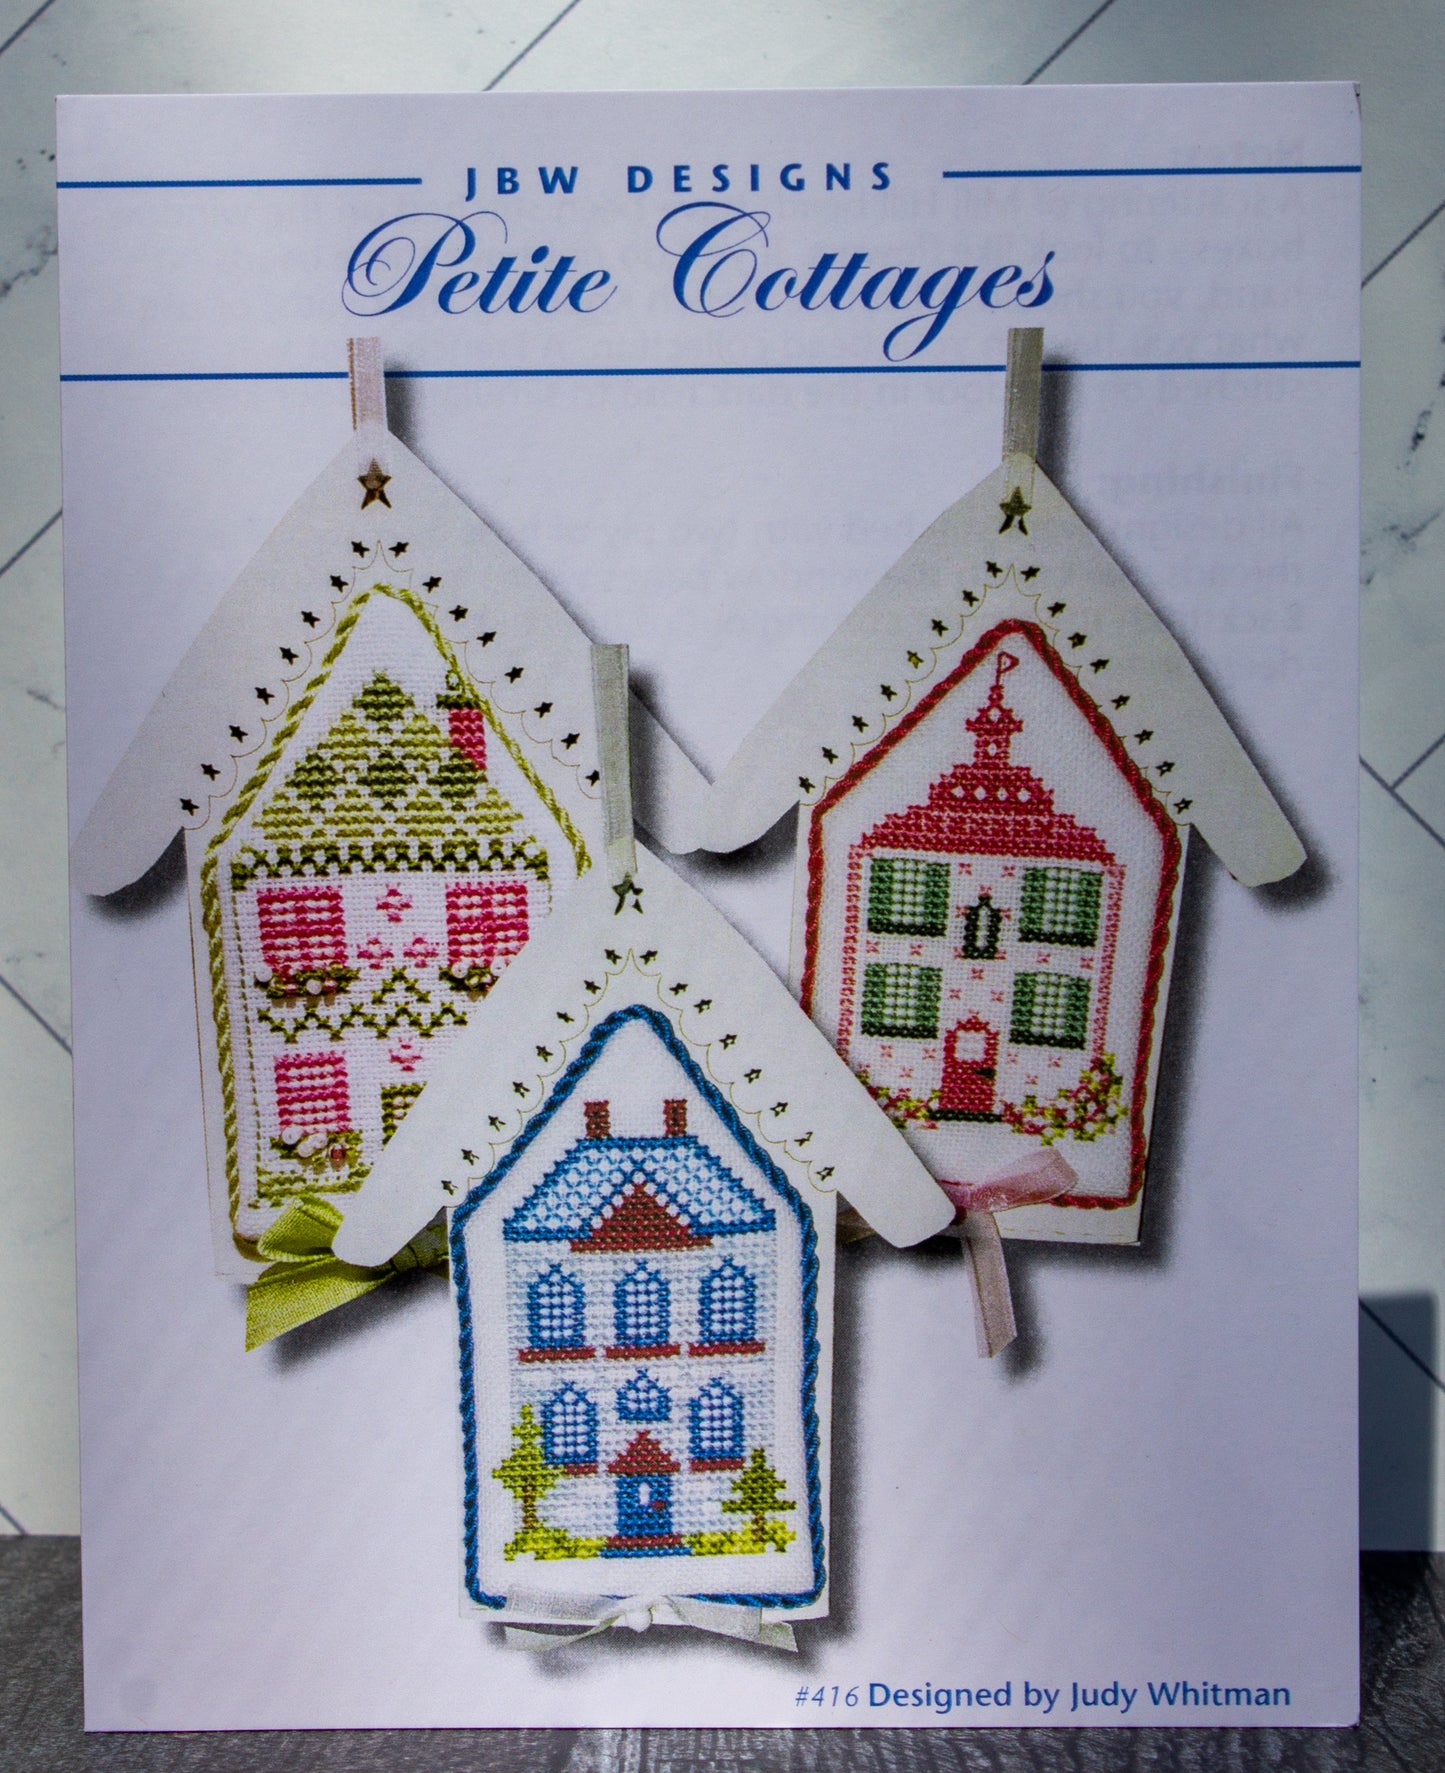 Petite Cottages by JBW Designs